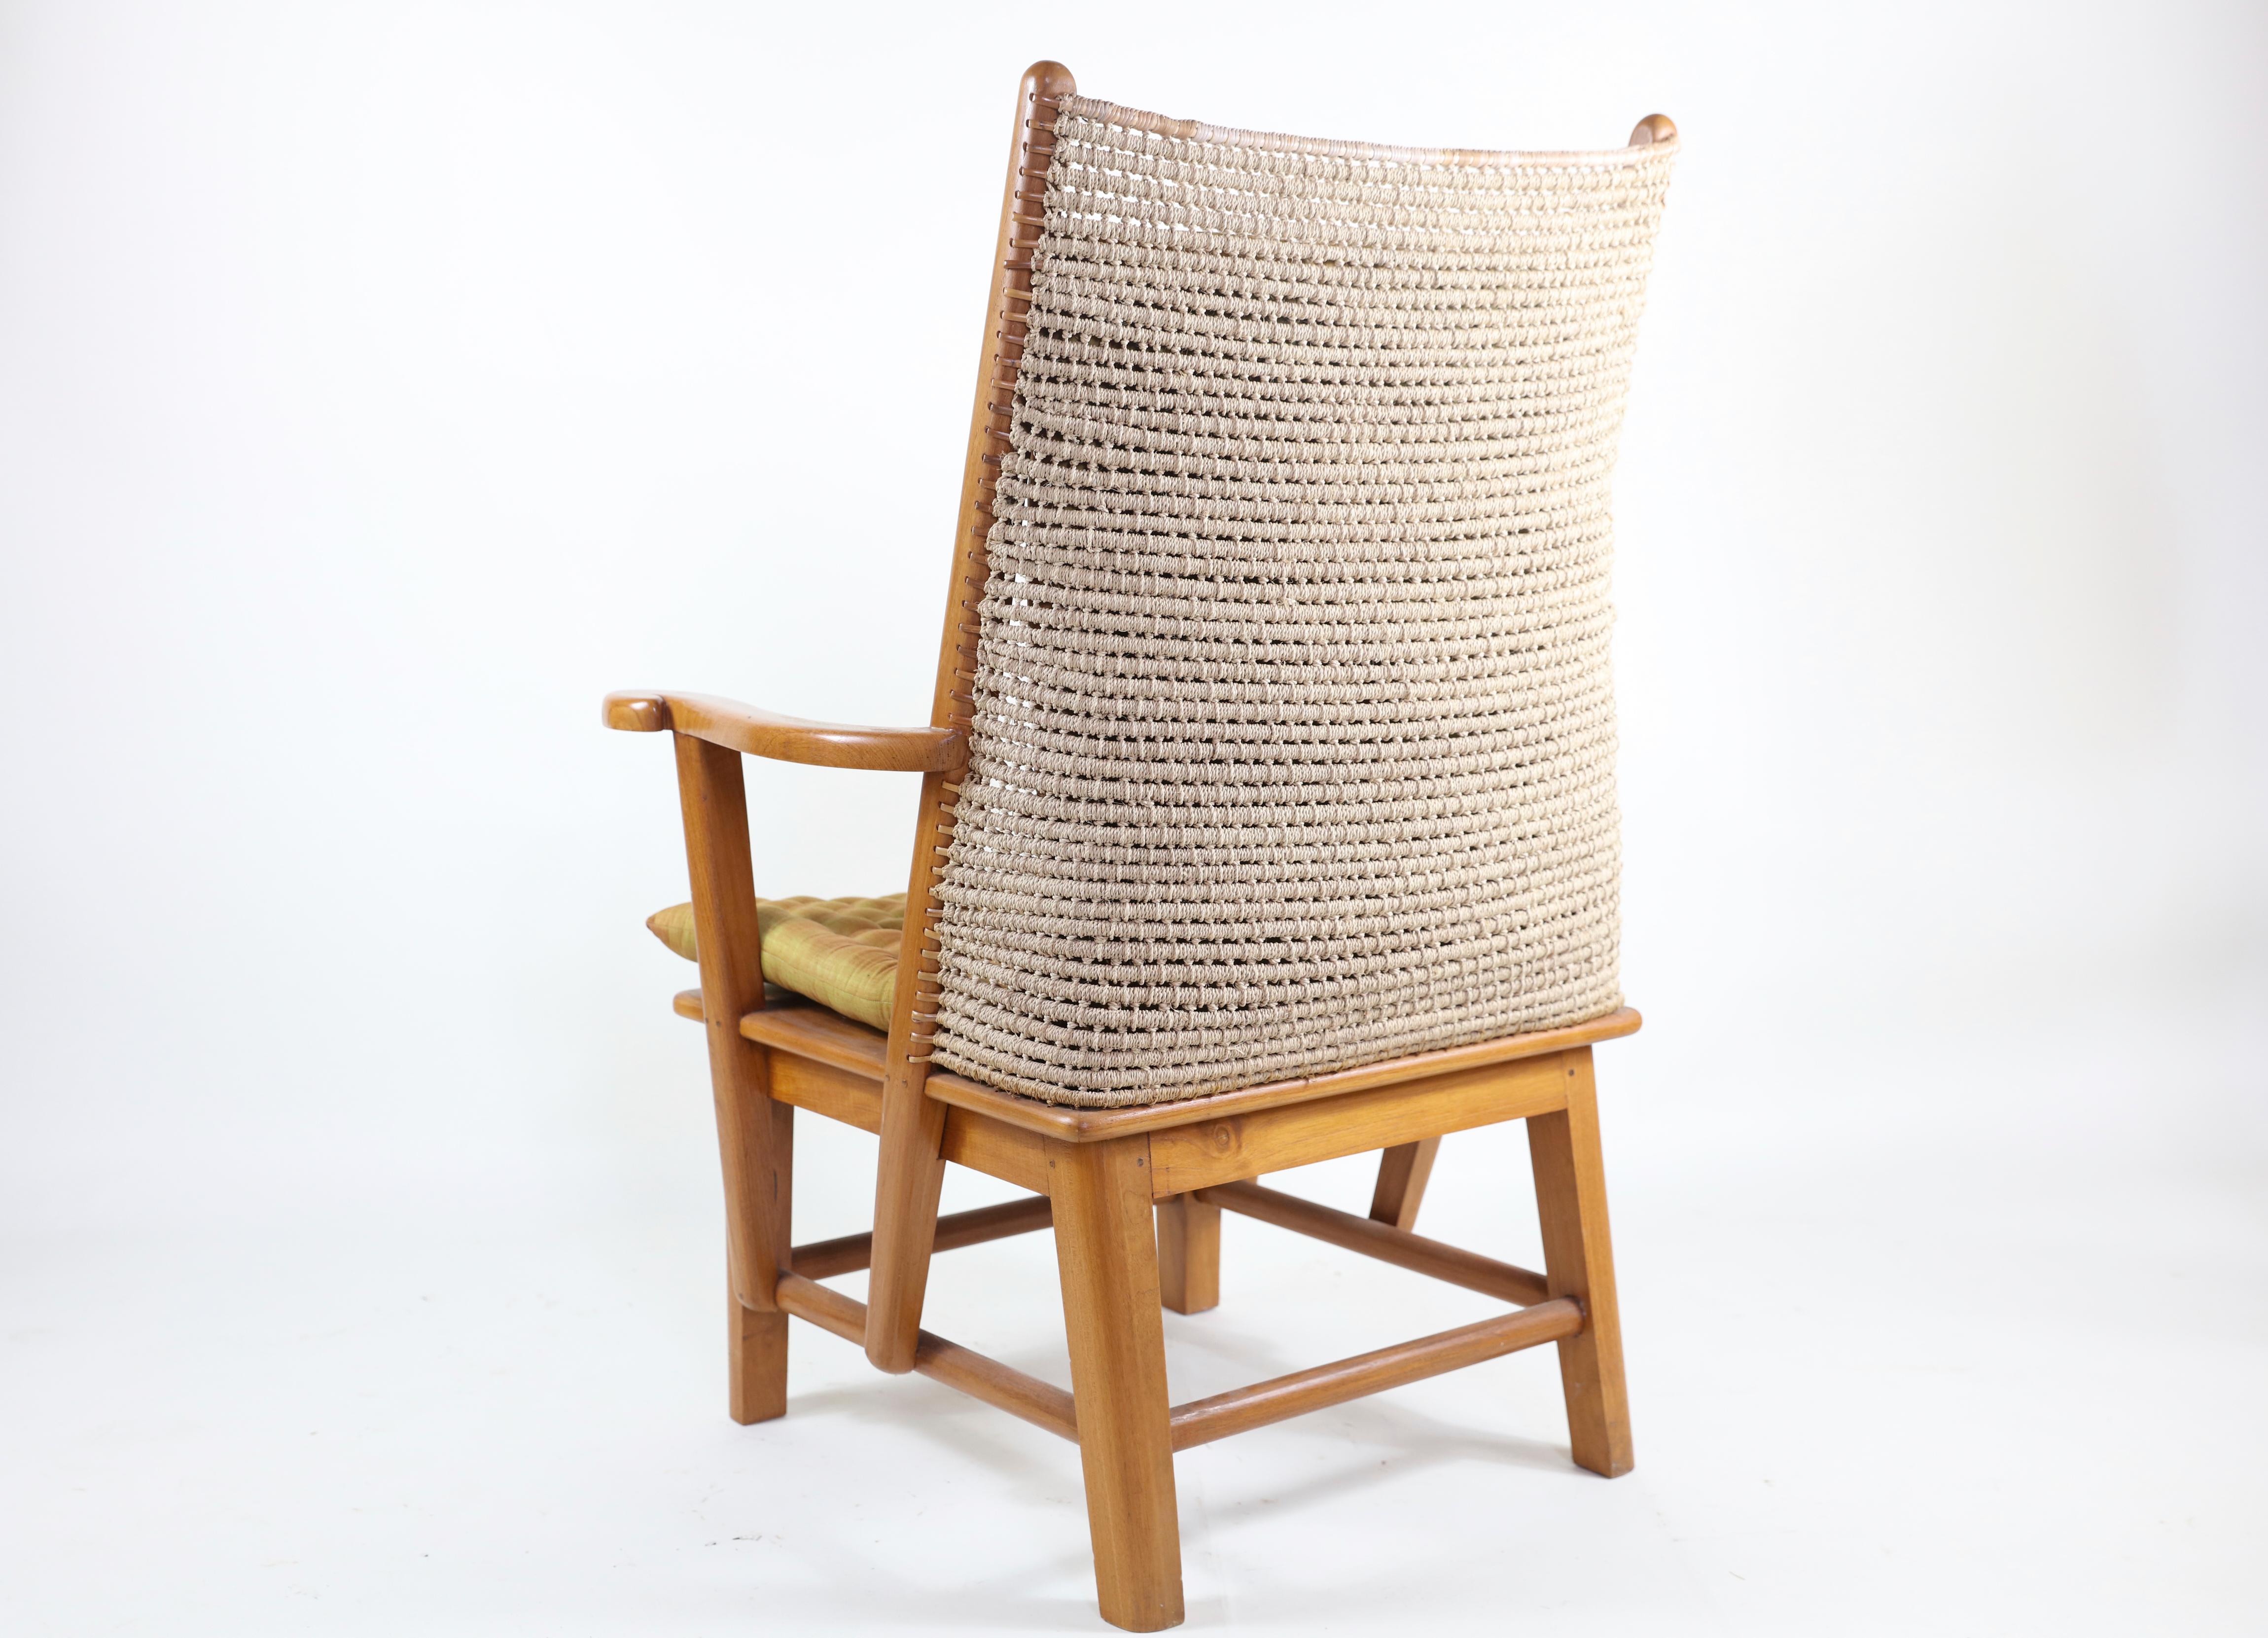 Pair of Woven Jute High Back Chairs with Cushions 1